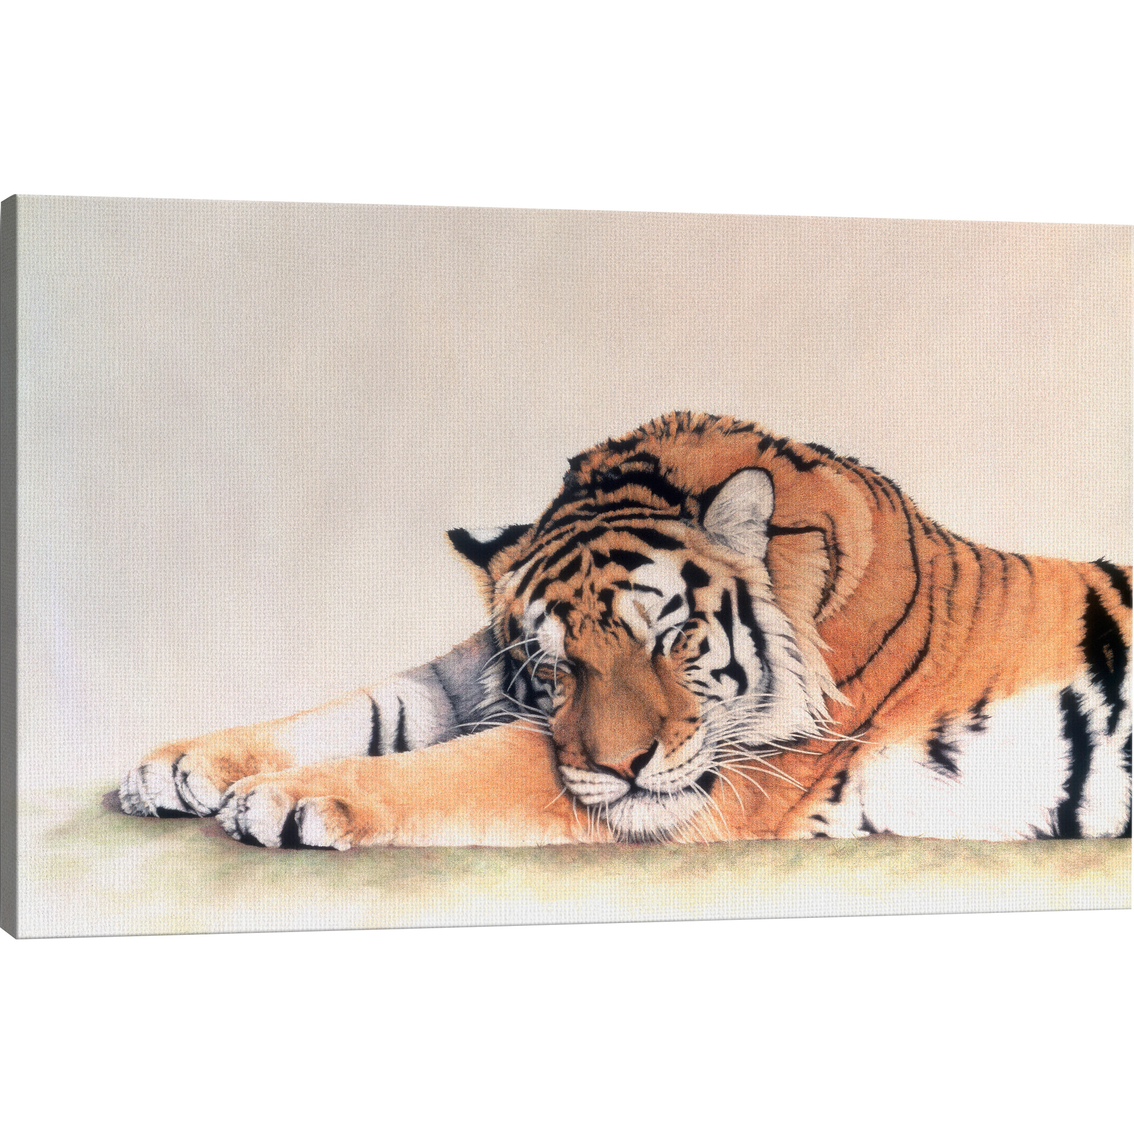 Inkstry Sleeping Tiger Wrapped Giclee Art - Image 2 of 3